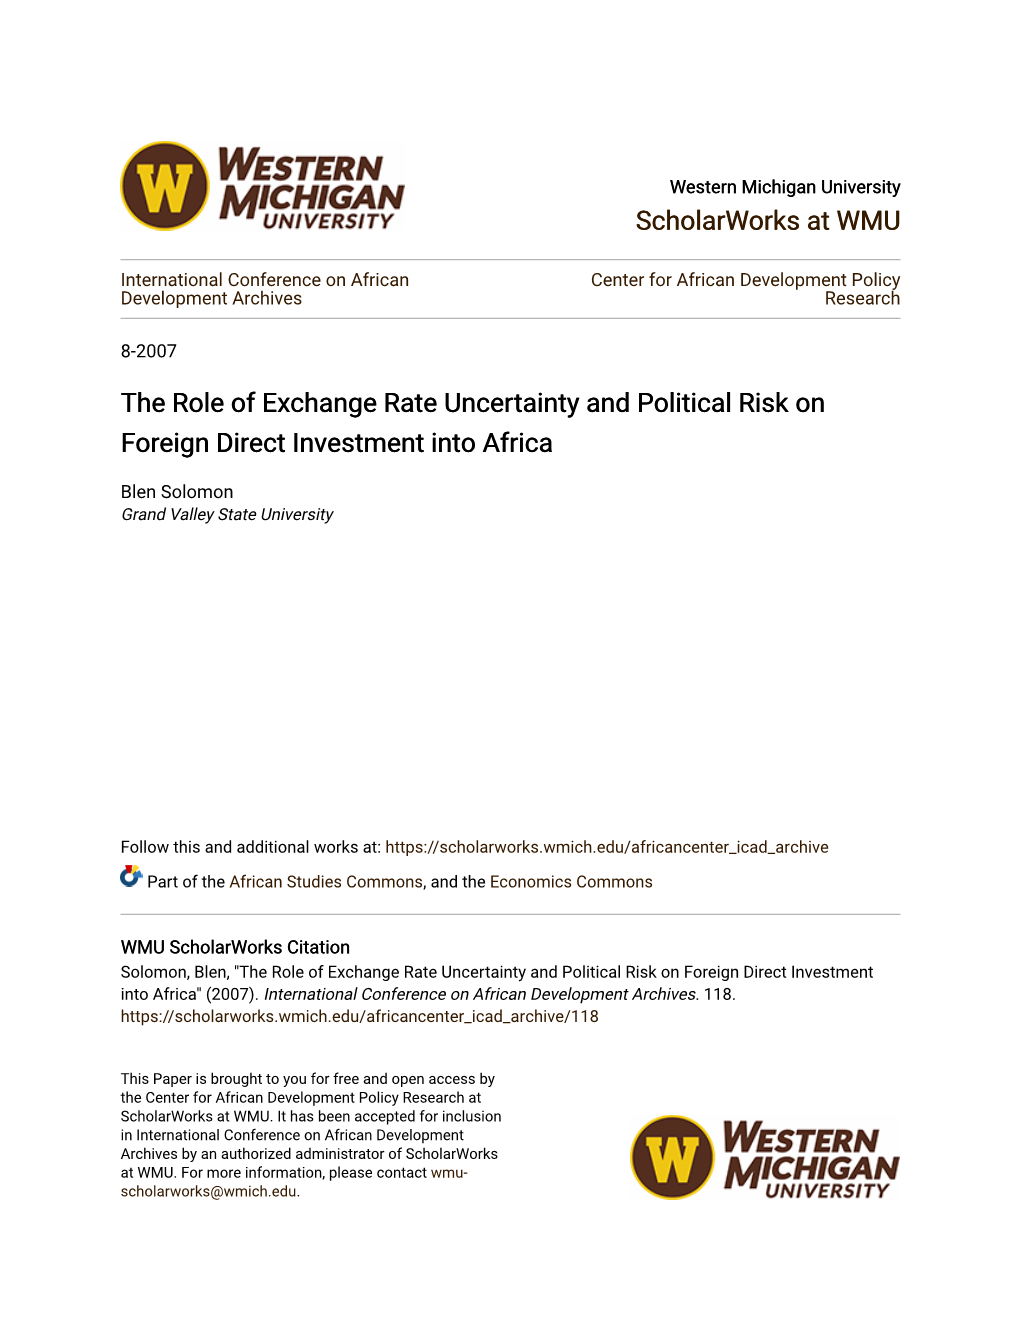 The Role of Exchange Rate Uncertainty and Political Risk on Foreign Direct Investment Into Africa